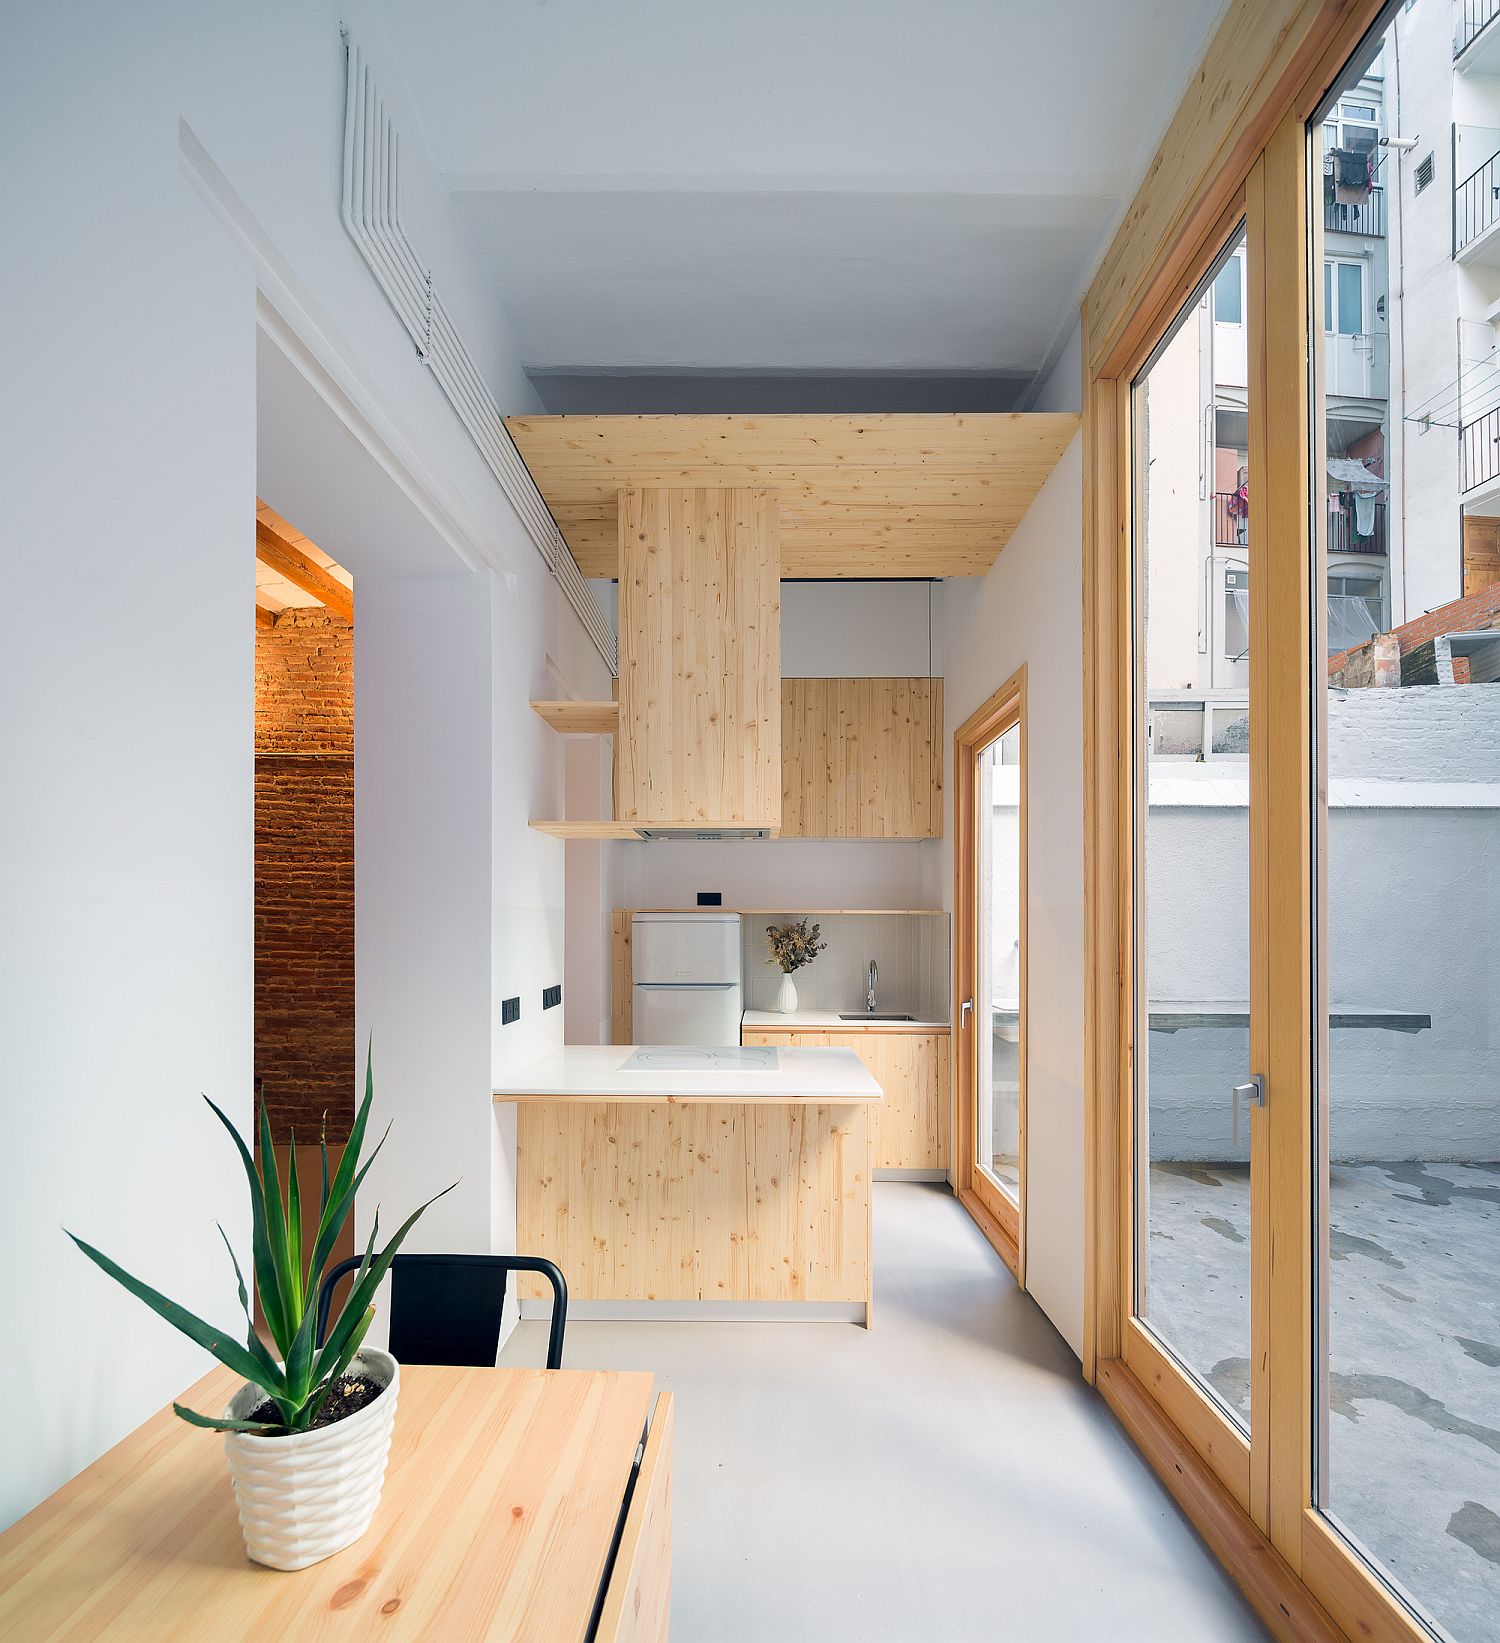 Exquisite-and-space-savvy-tiny-kitchen-in-white-and-wood